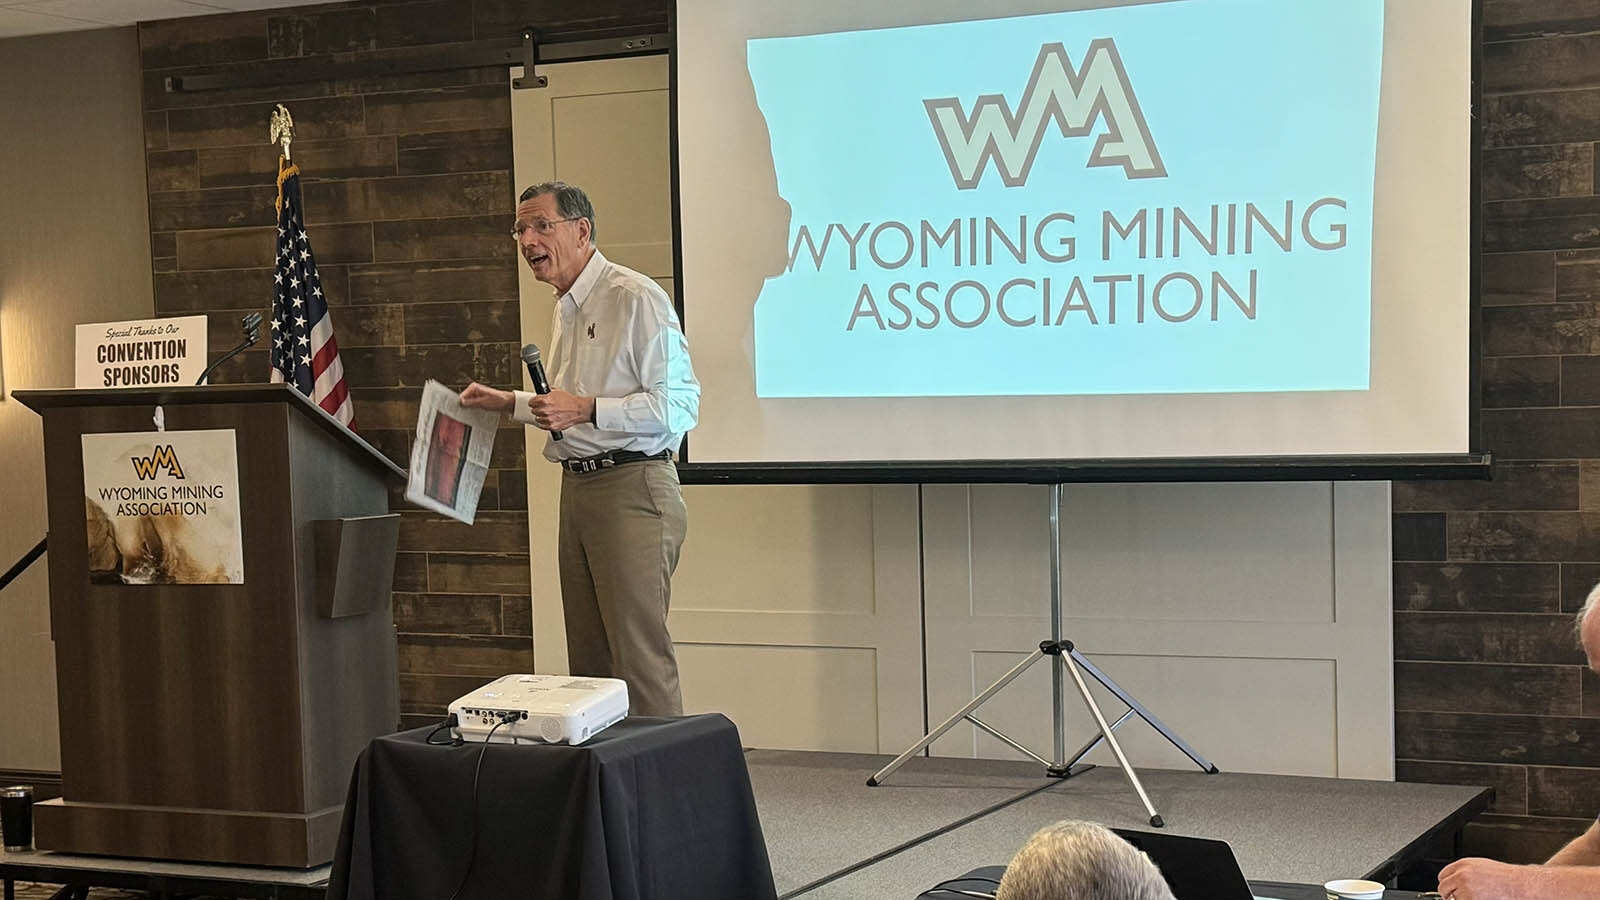 U.S. Sens. John Barrasso and Cynthia Lummis, both of whom are Republicans from Wyoming, blasted the Environmental Protection Agency and other federal agency rules that are designed to phase out coal and natural gas-fired plants. The lawmakers delivered their remarks at the Wyoming Mining Association’s annual convention in Cody on Friday. Above, Barrasso said that the president has weaponized the EPA, "weaponized them to prioritize climate over energy that is available, affordable and reliable. Climate for them is a religion.”